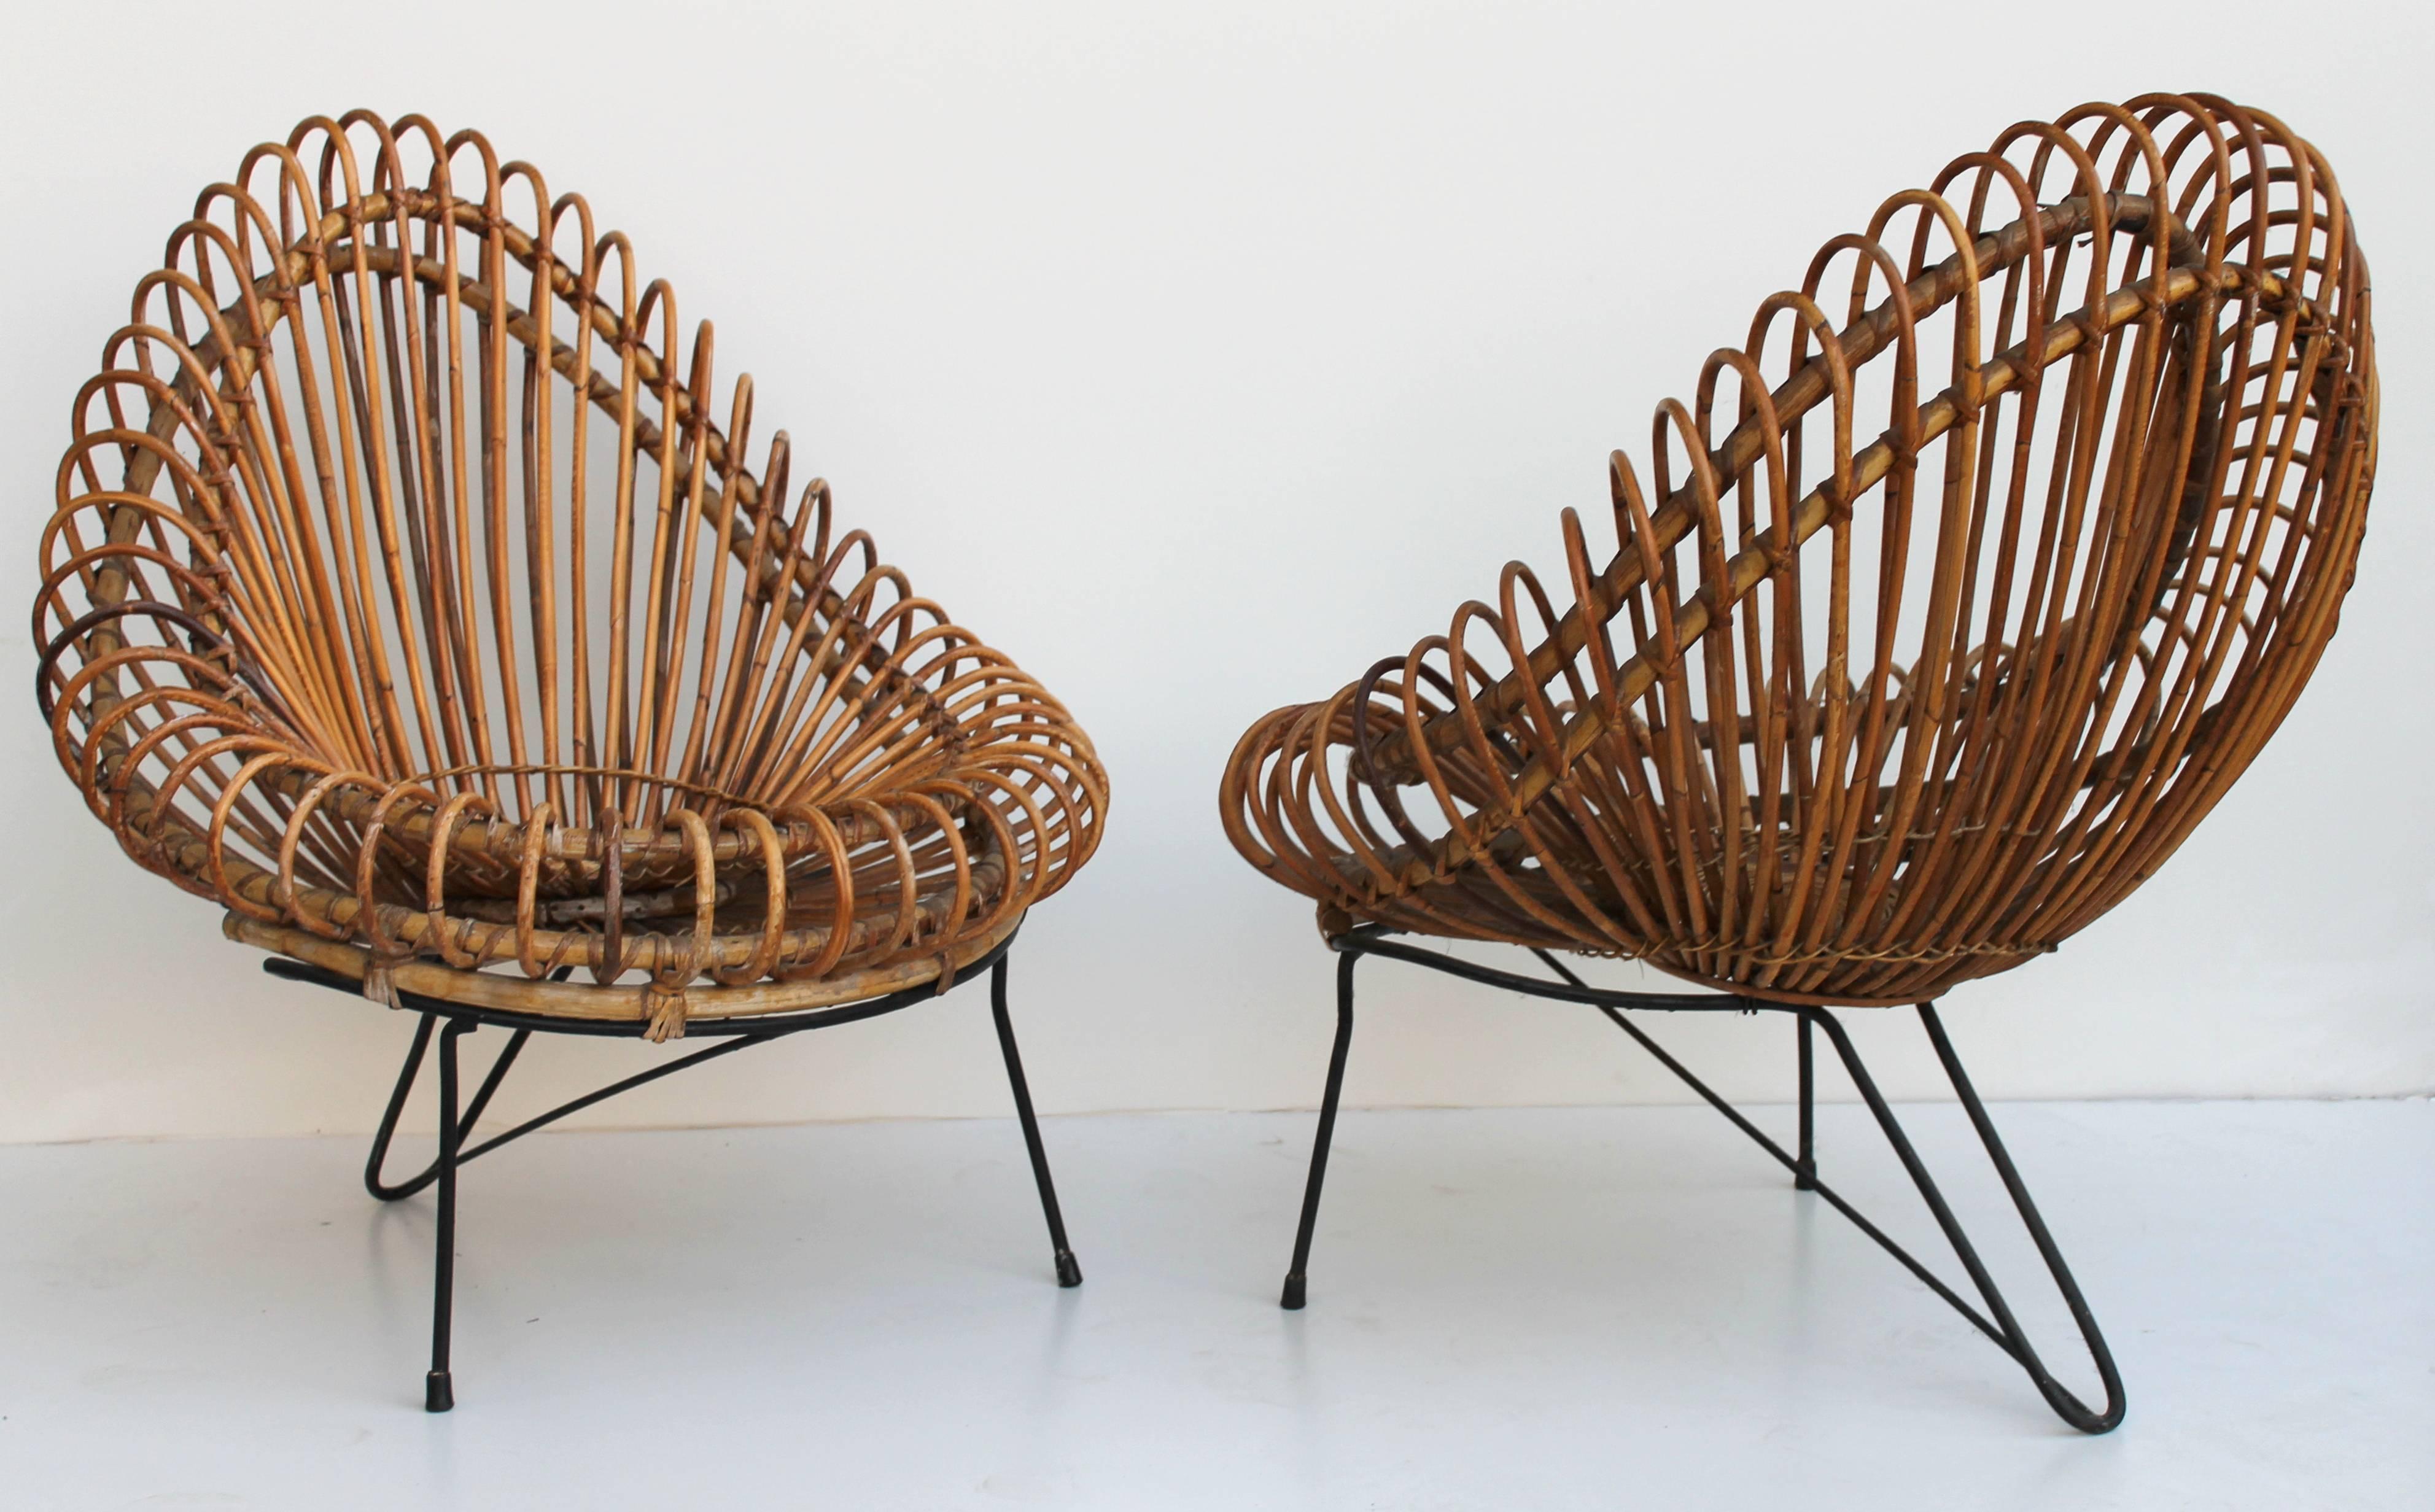 This basketware lounge chairs from 1955 is in good original condition, designed by Janine Abraham and Dirk Jan Rol. The elegant basket seat shell is held by black lacquered steel frame. Manufactured by Edition Rougier.

